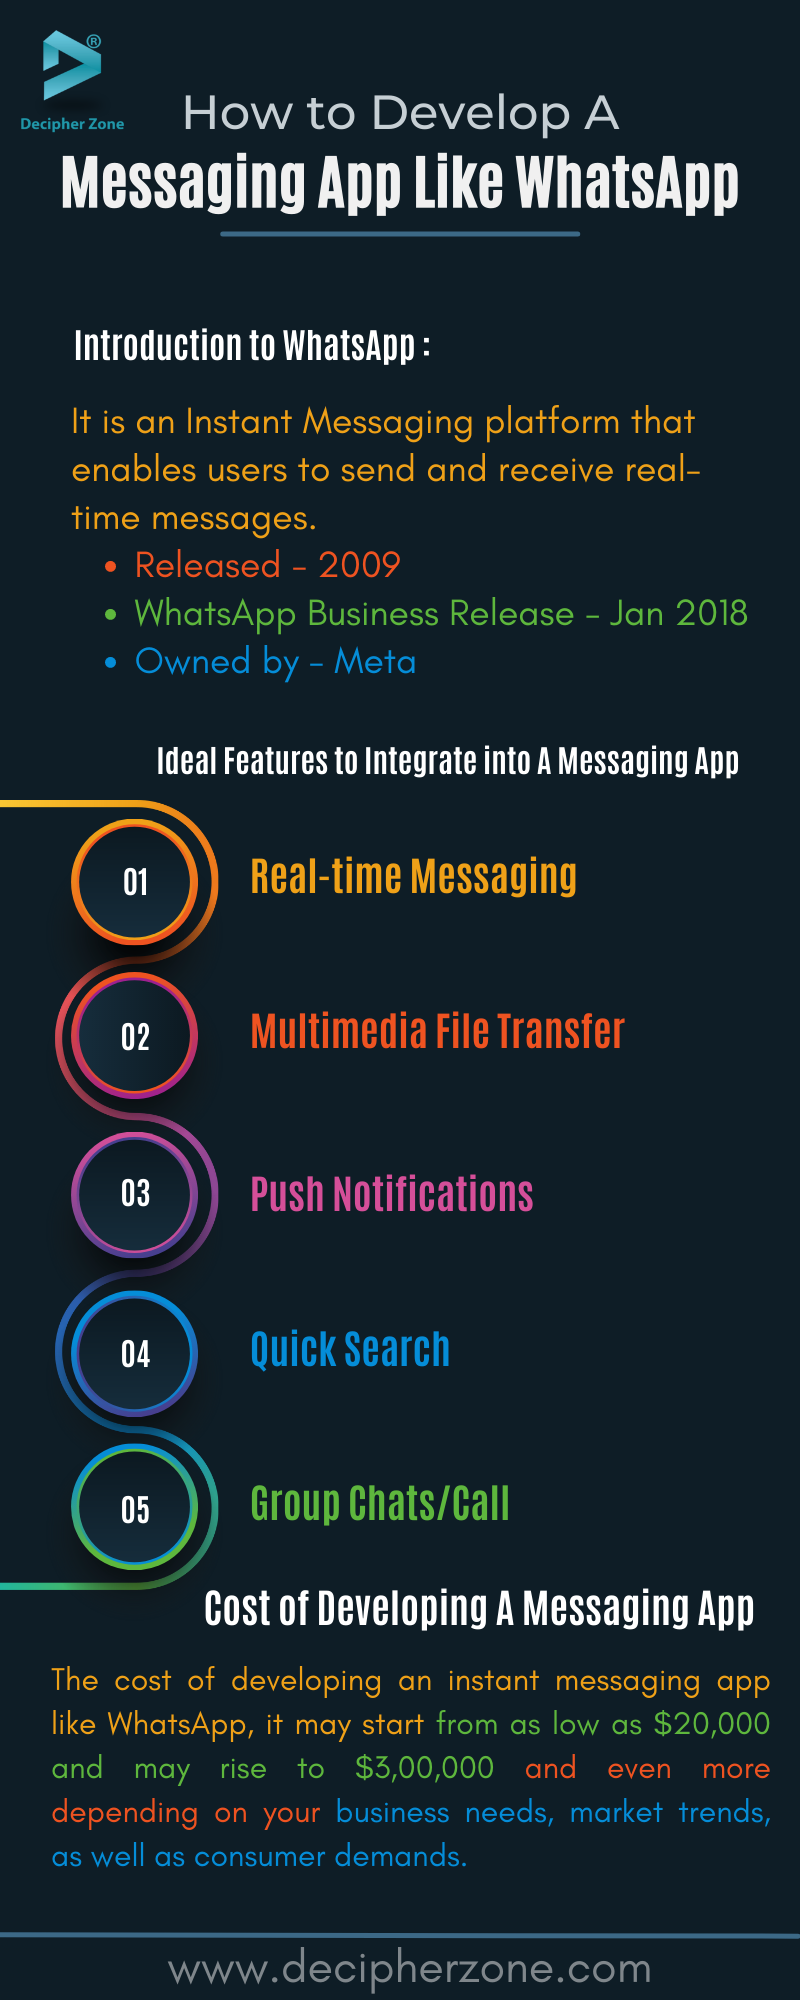 Develop A Messaging App like WhatsApp - Features and Cost